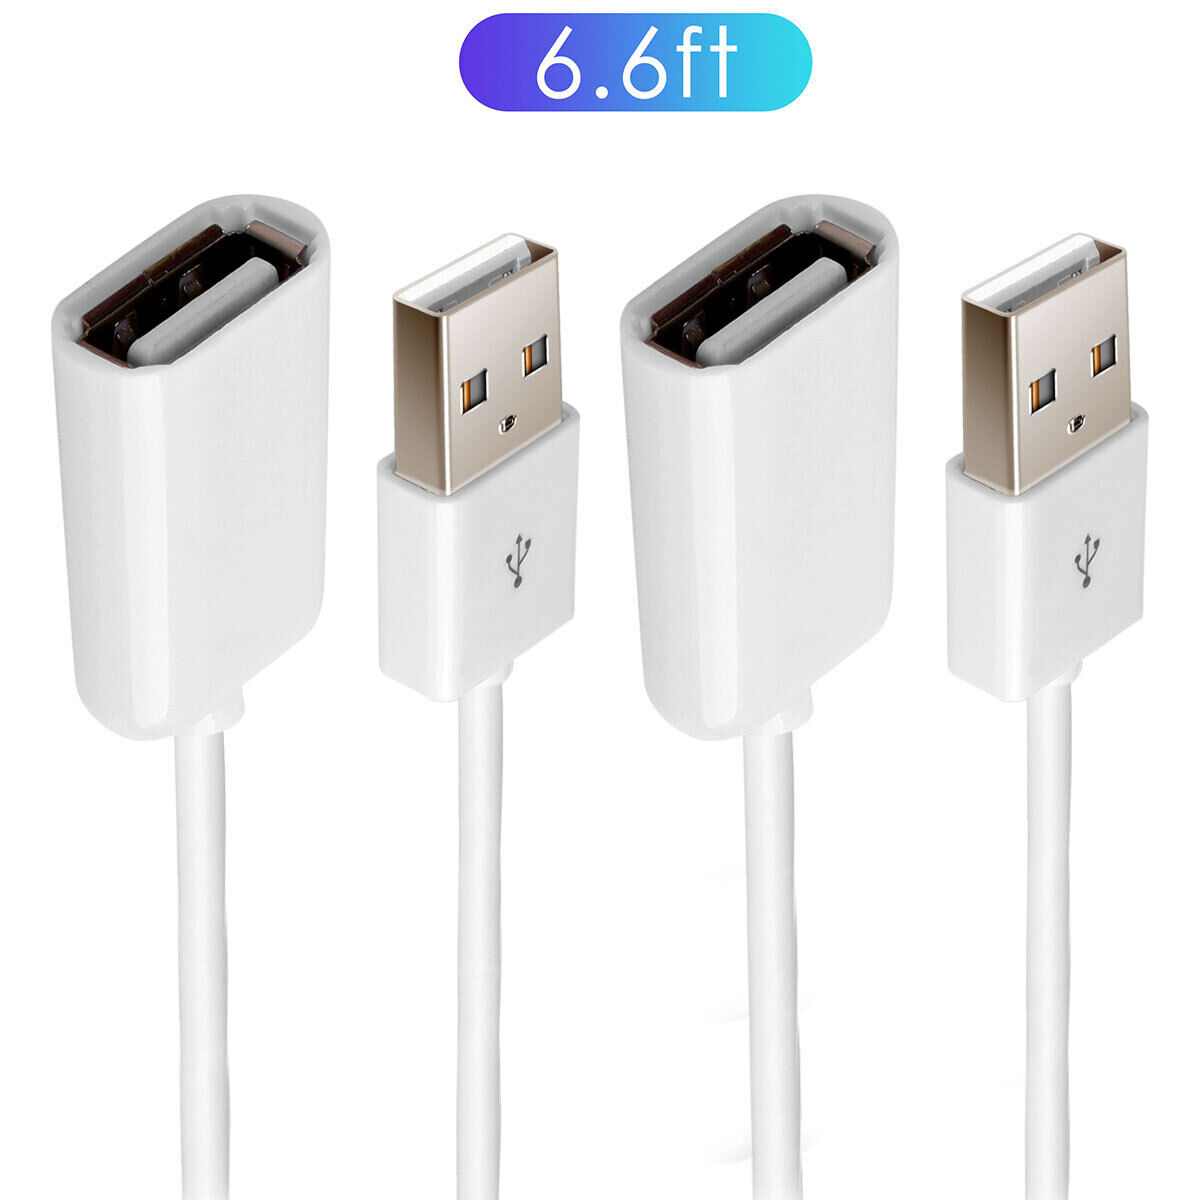 2-PACK High-Speed USB to USB Extension Cable USB 3.0 Adapter Extender Cord 6.6FT